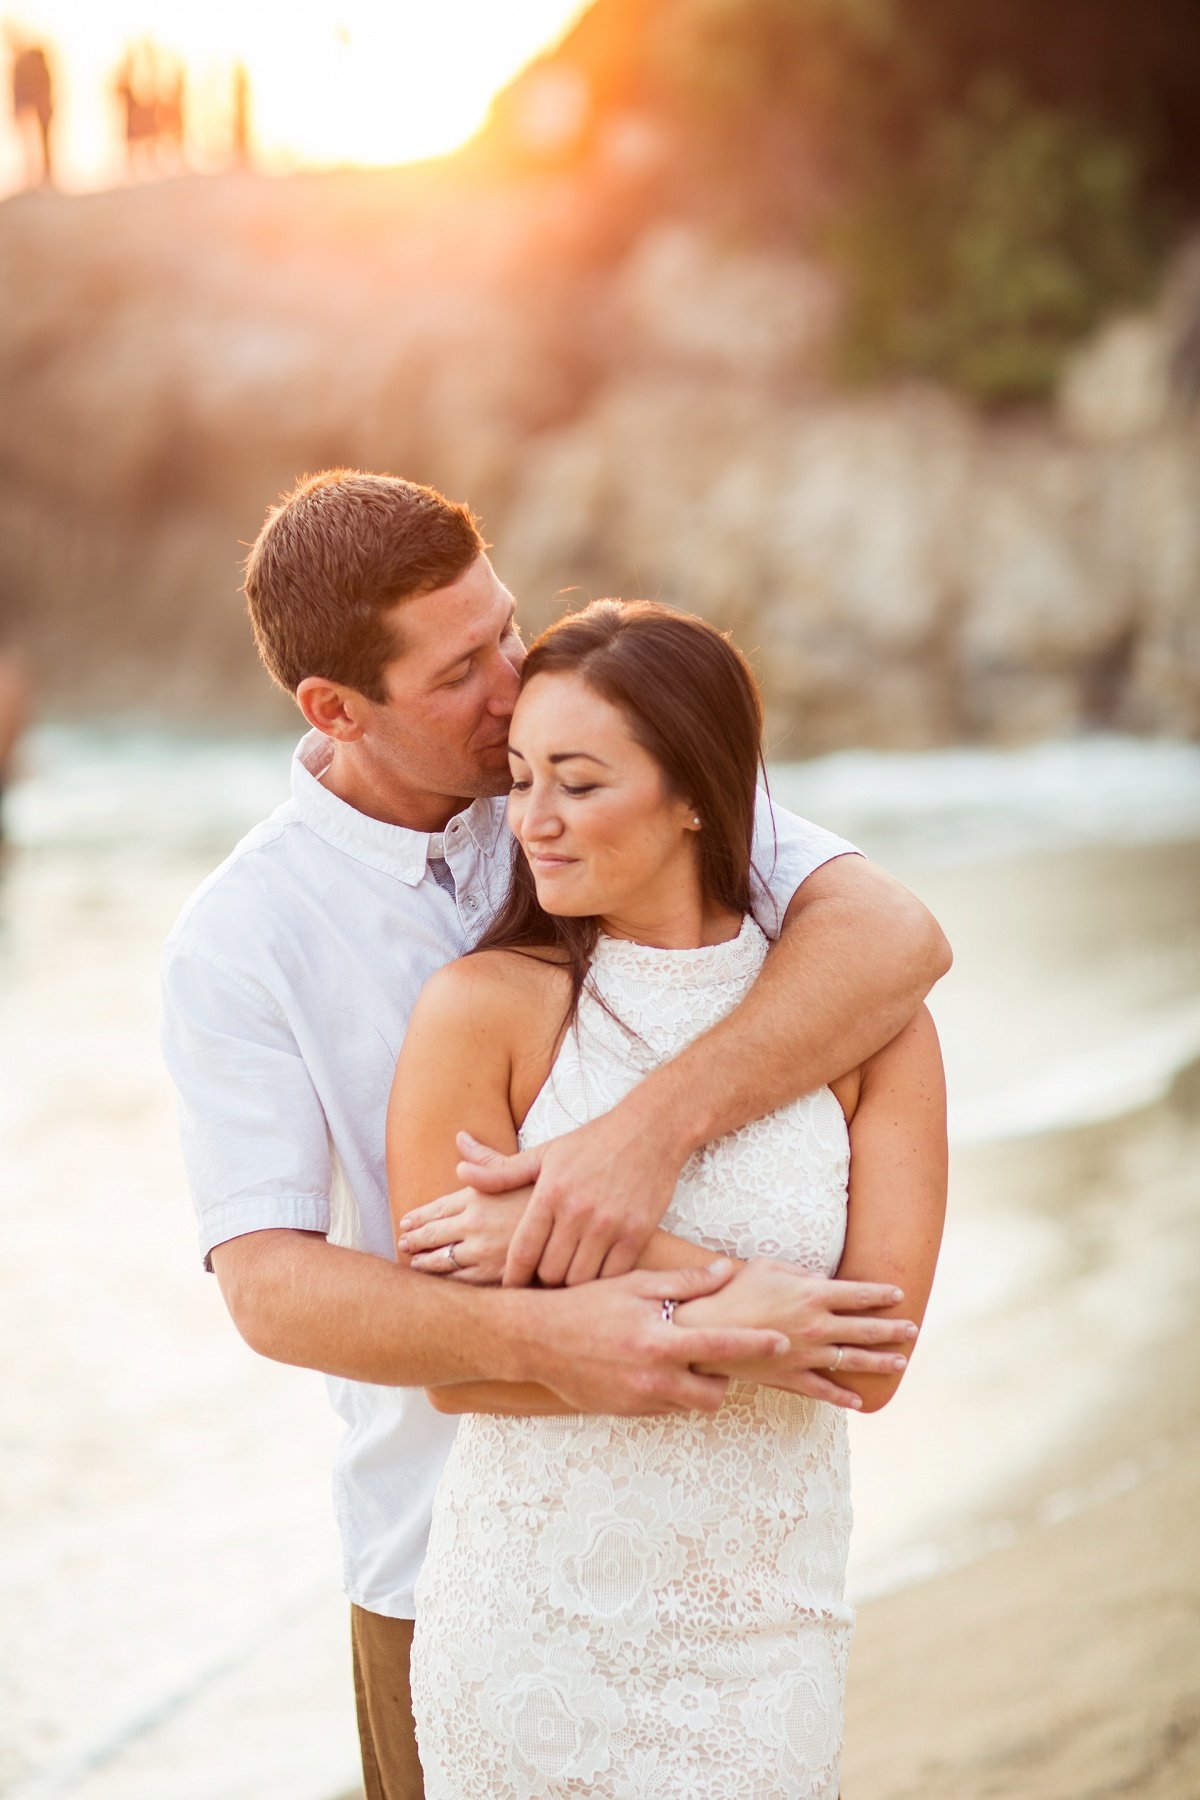 Groom to be fully embraces his Bride and kisses her head while walking along the beach